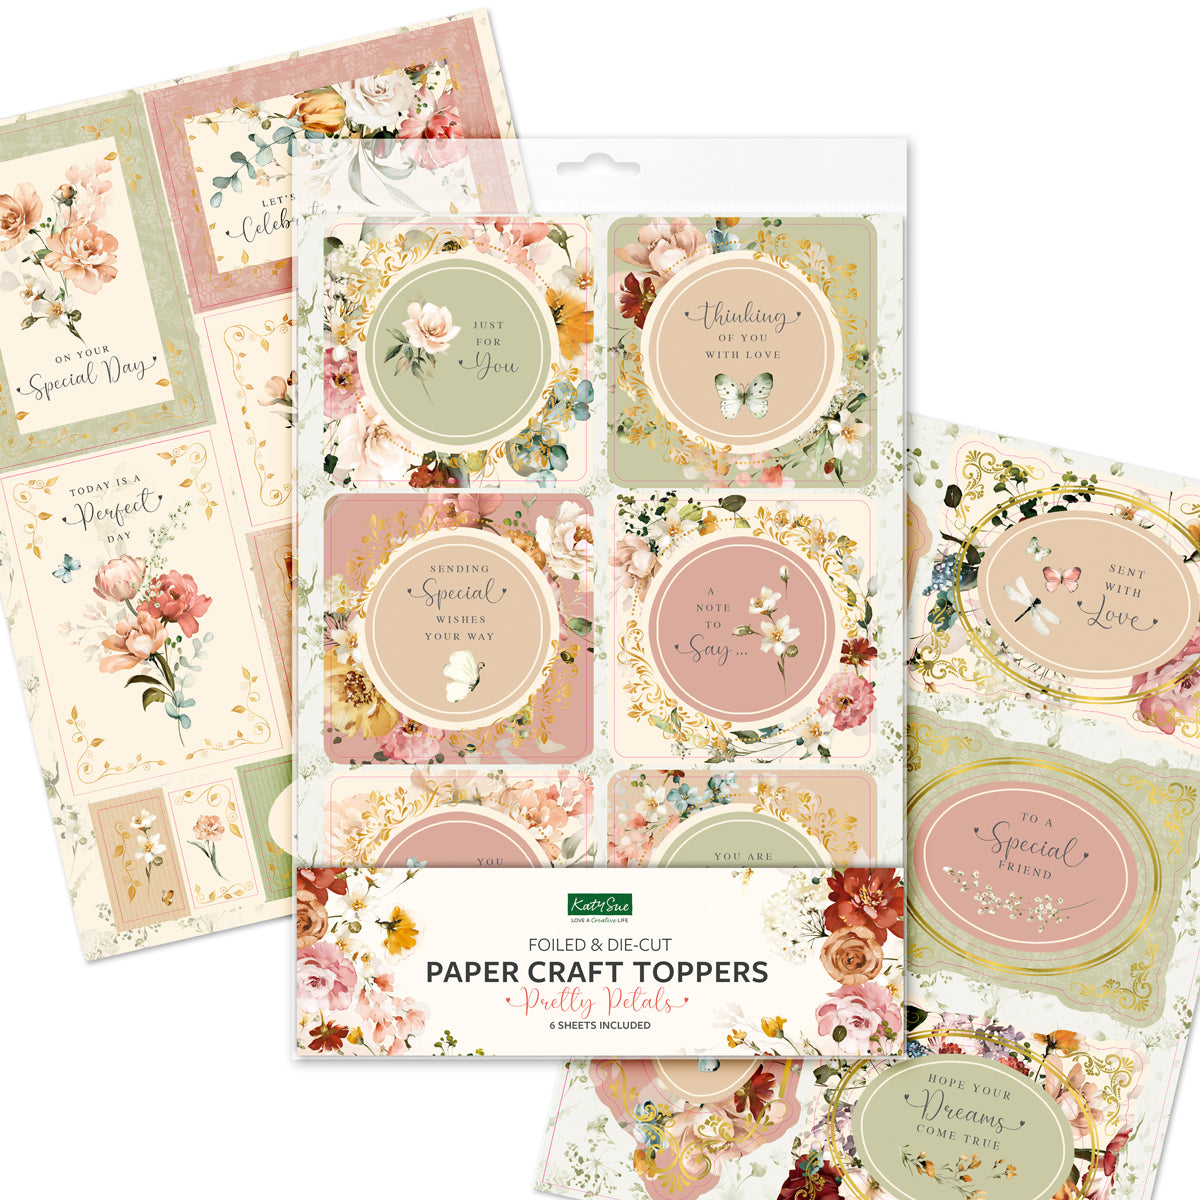 Pretty Petals Foiled Paper Craft Toppers, 6 sheets